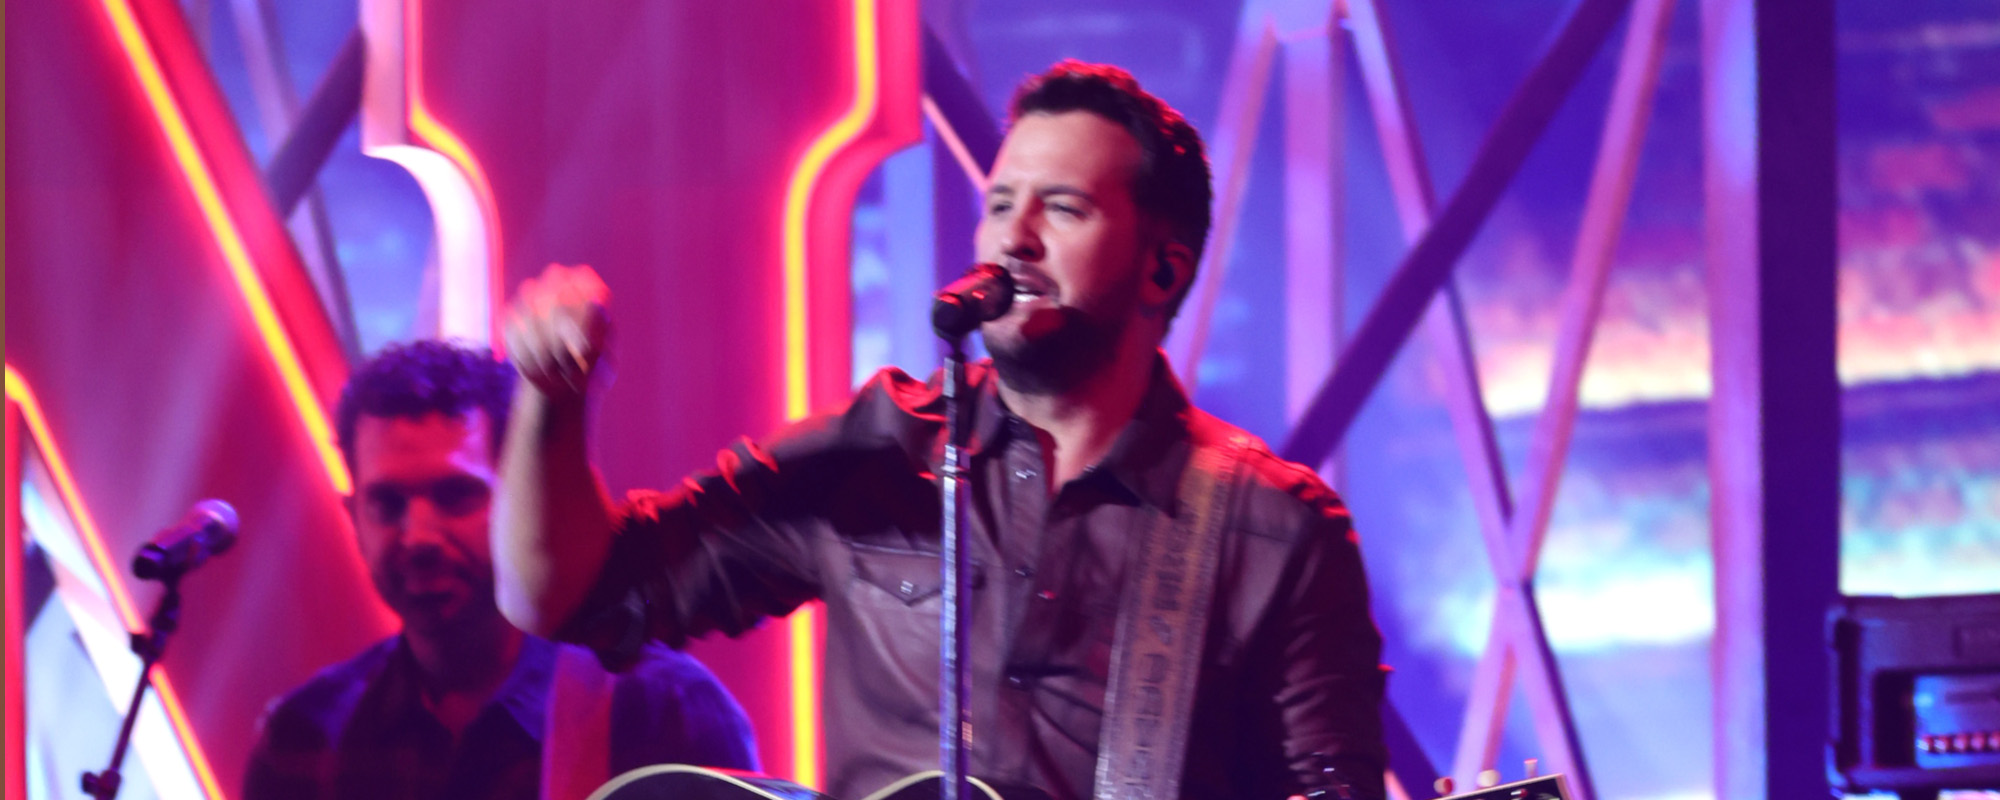 Luke Bryan Cancels Several Tour Dates Due to Undisclosed Illness